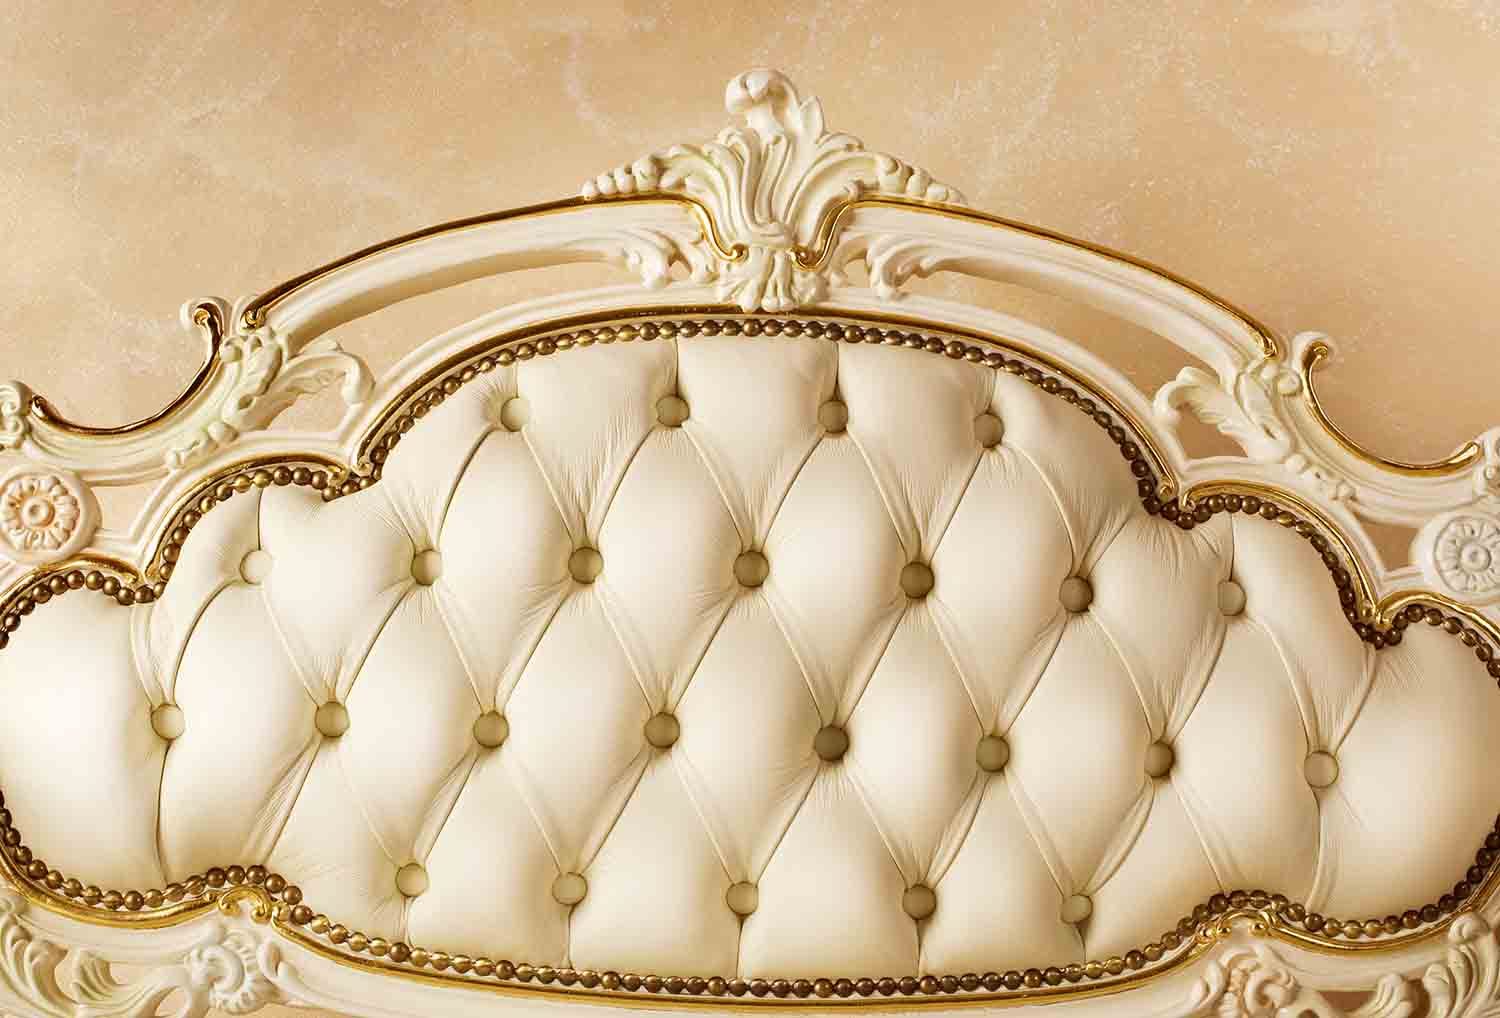 Old Lace Headboard With Mable Wall Photography Backdrop J-0049 Shopbackdrop